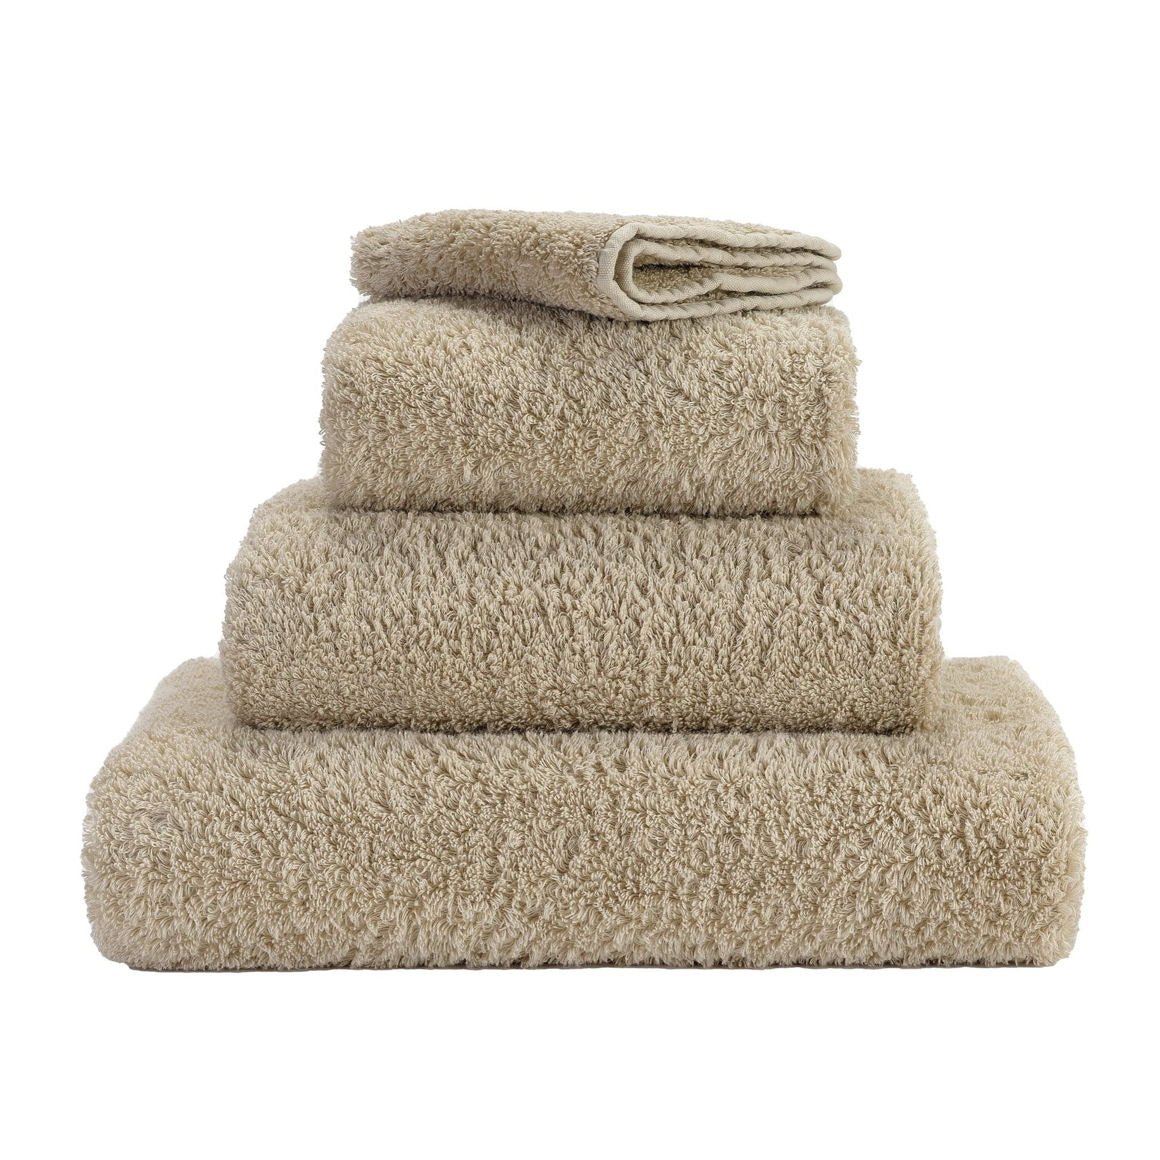 Super Pile Luxury Bath Towels by Abyss & Habidecor | 770 Linen - |VESIMI Design| Luxury and Rustic bathrooms online